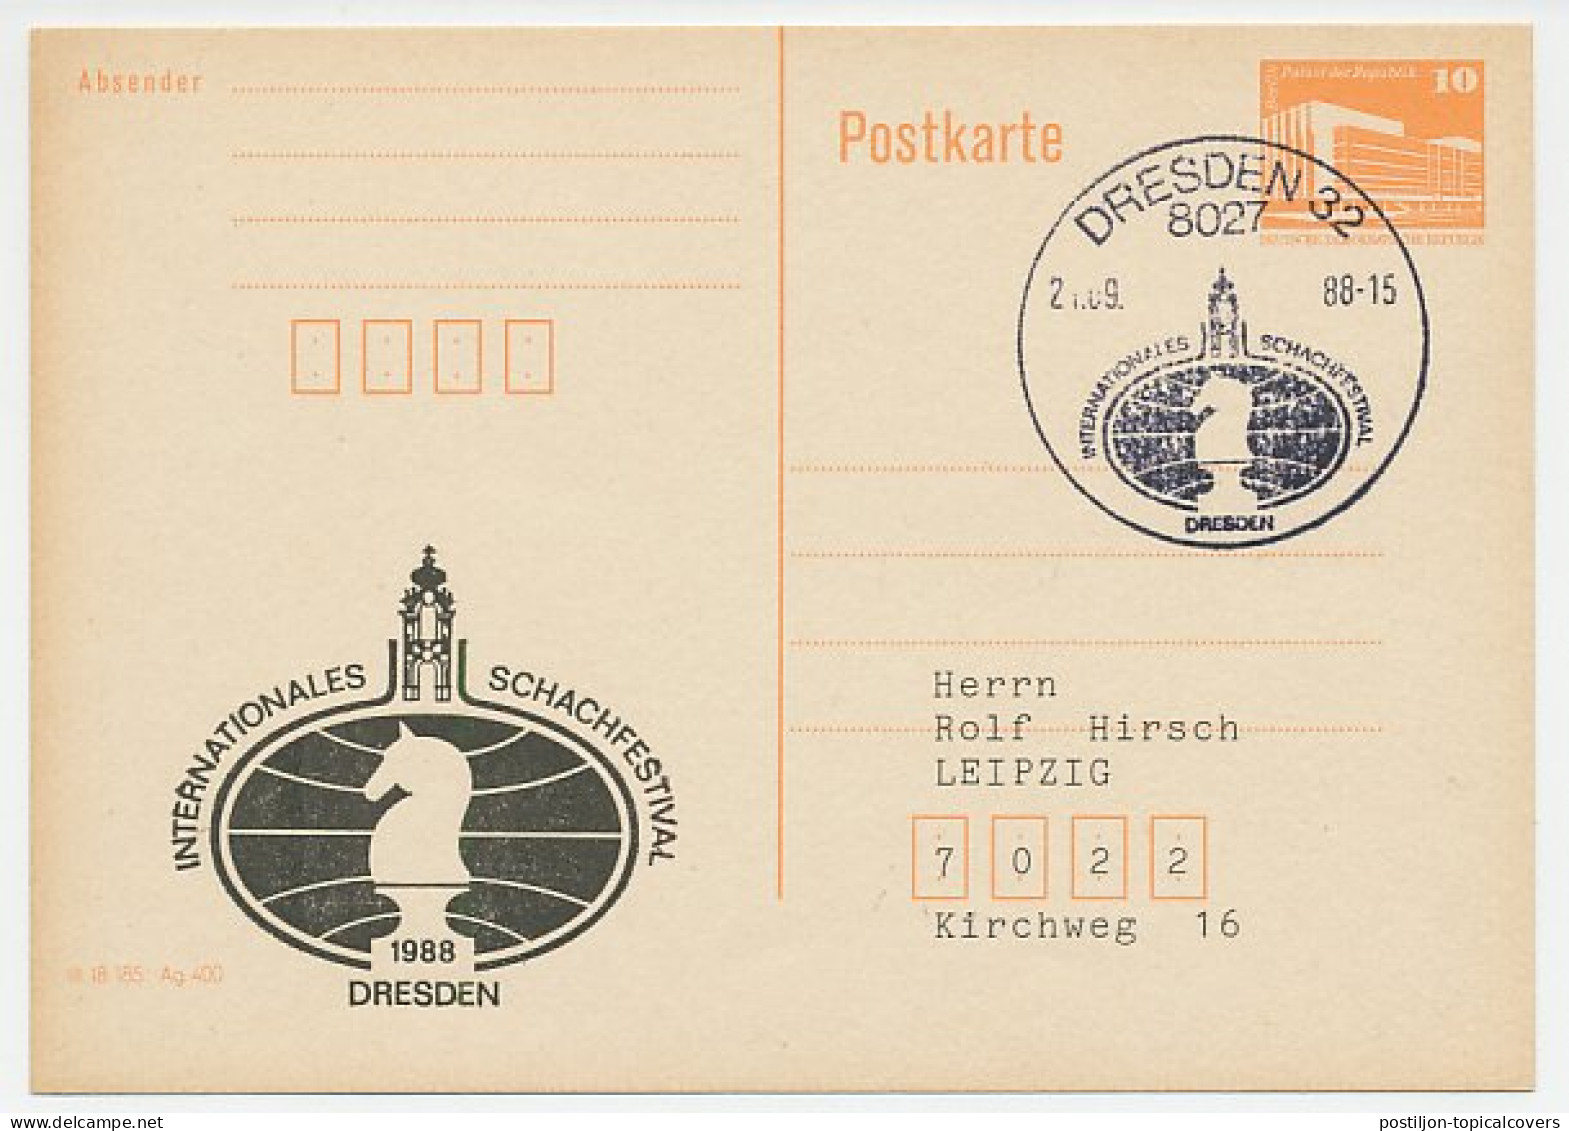 Postal Stationery / Postmark Germany / DDR 1988 Chess Festival - Unclassified